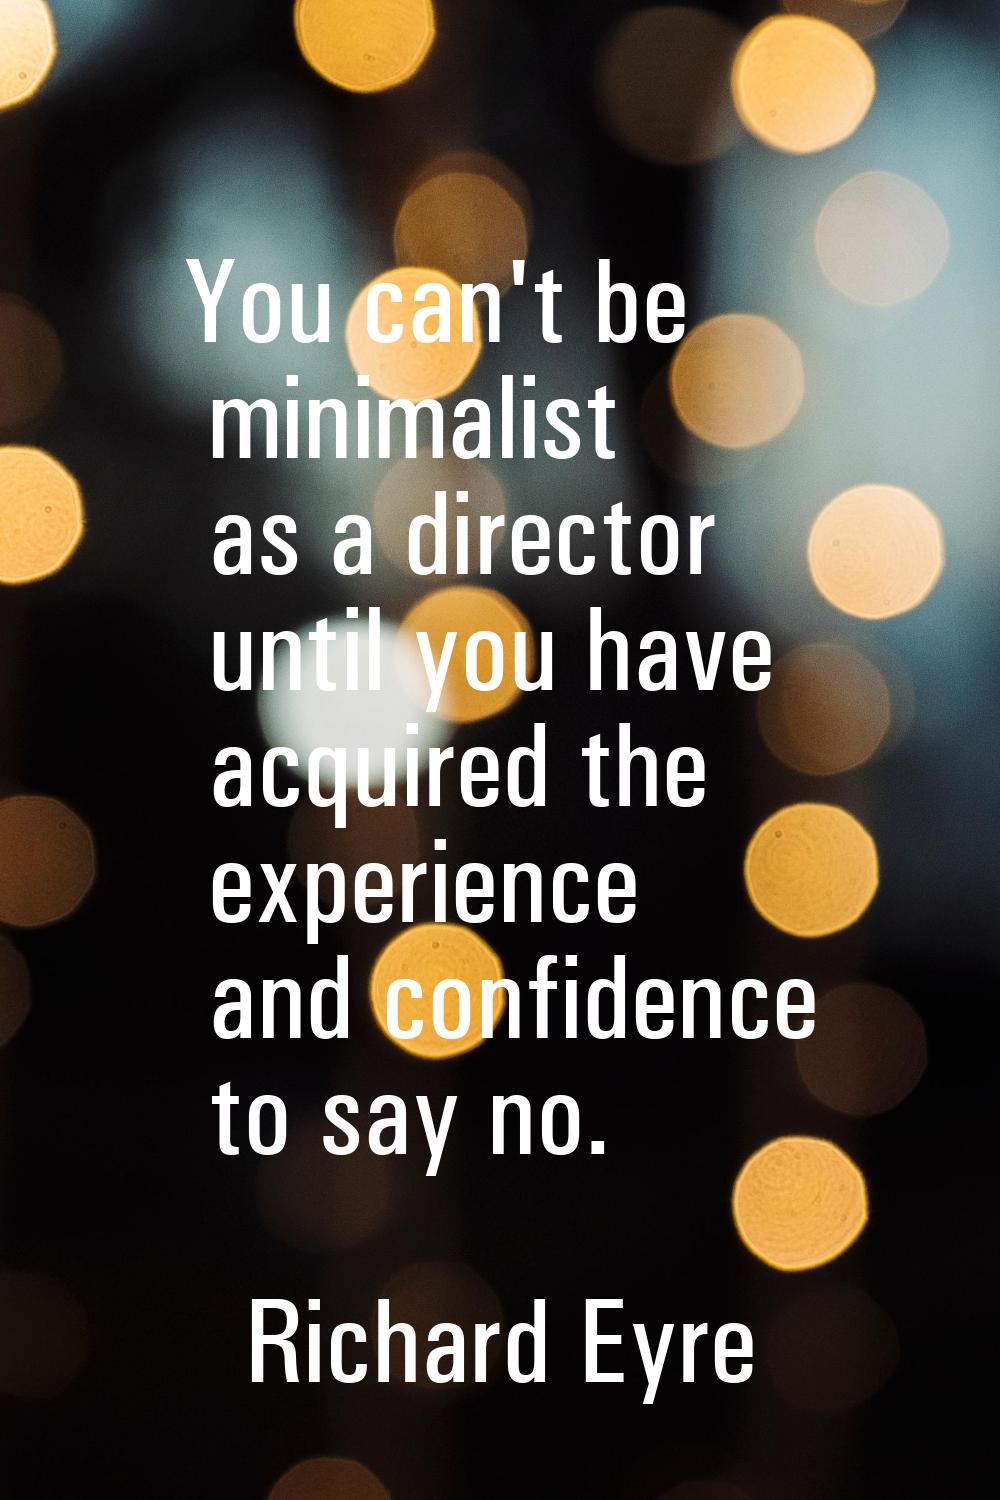 You can't be minimalist as a director until you have acquired the experience and confidence to say 